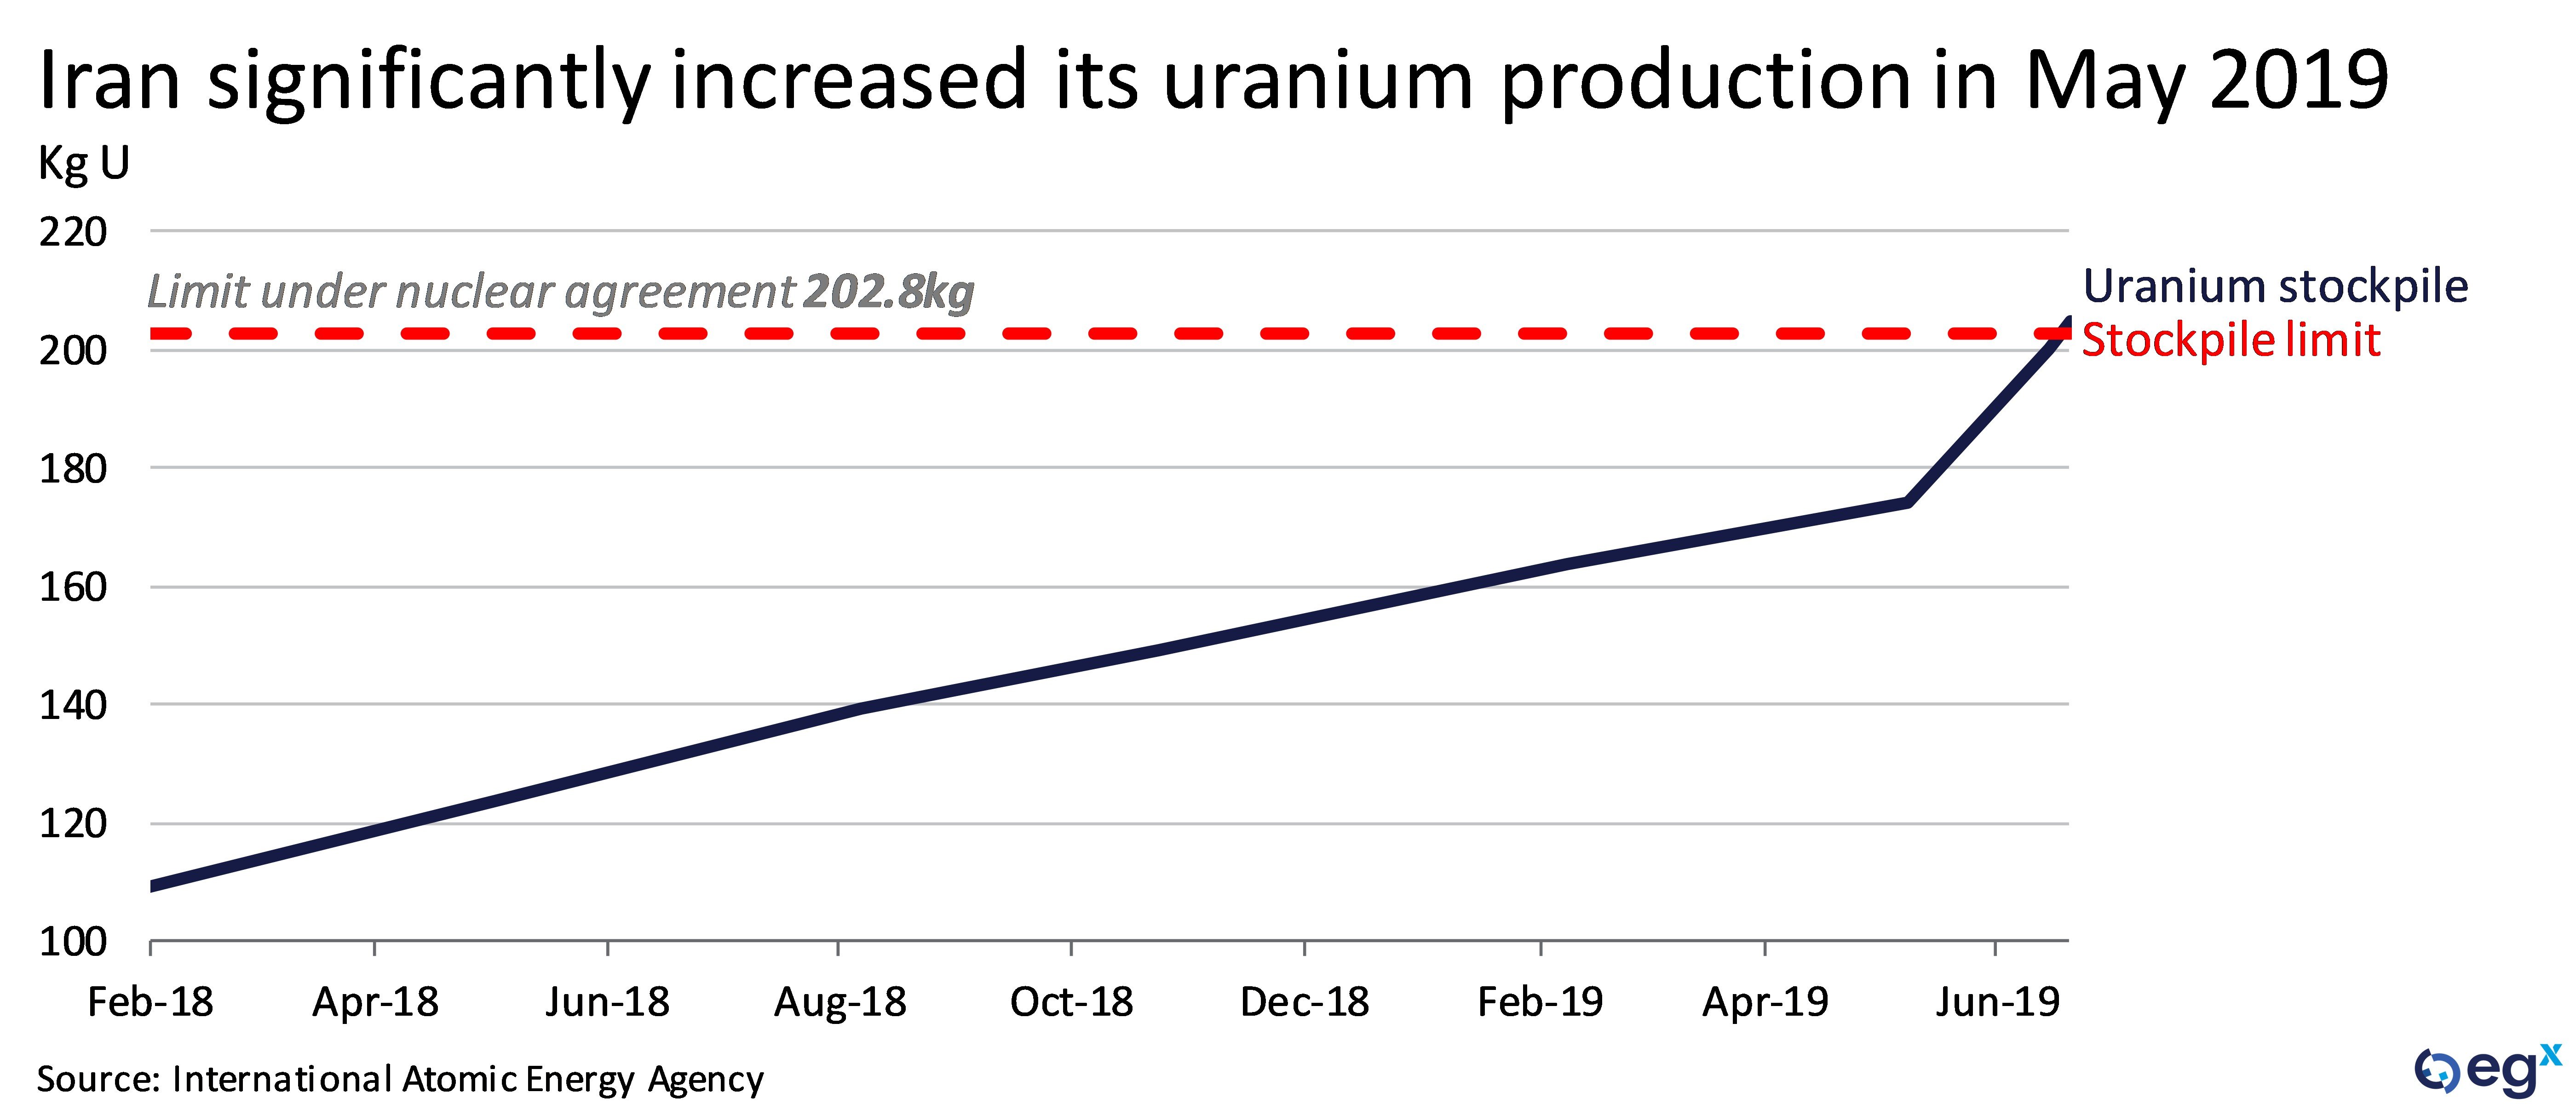 Iran significantly increased its uranium production in May 2019